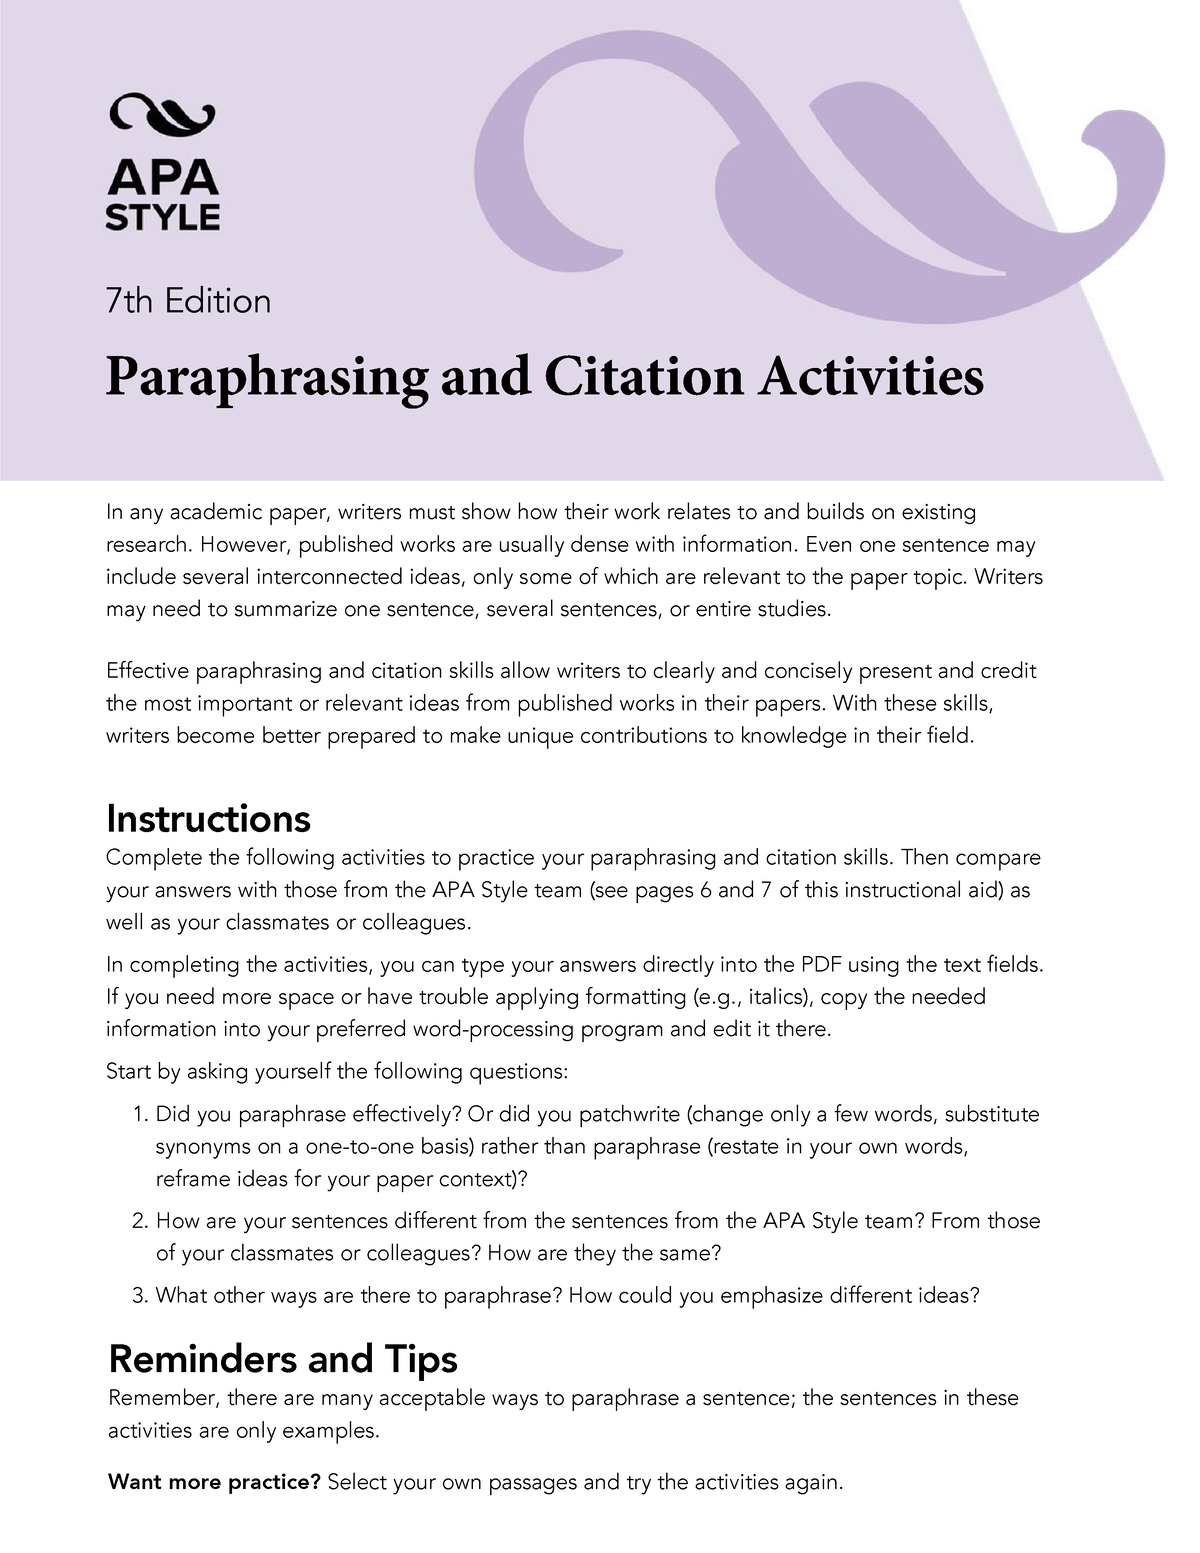 Paraphrasing-citation-activities for english class for study - 1 on a one -to-one basis) rather than - Studocu